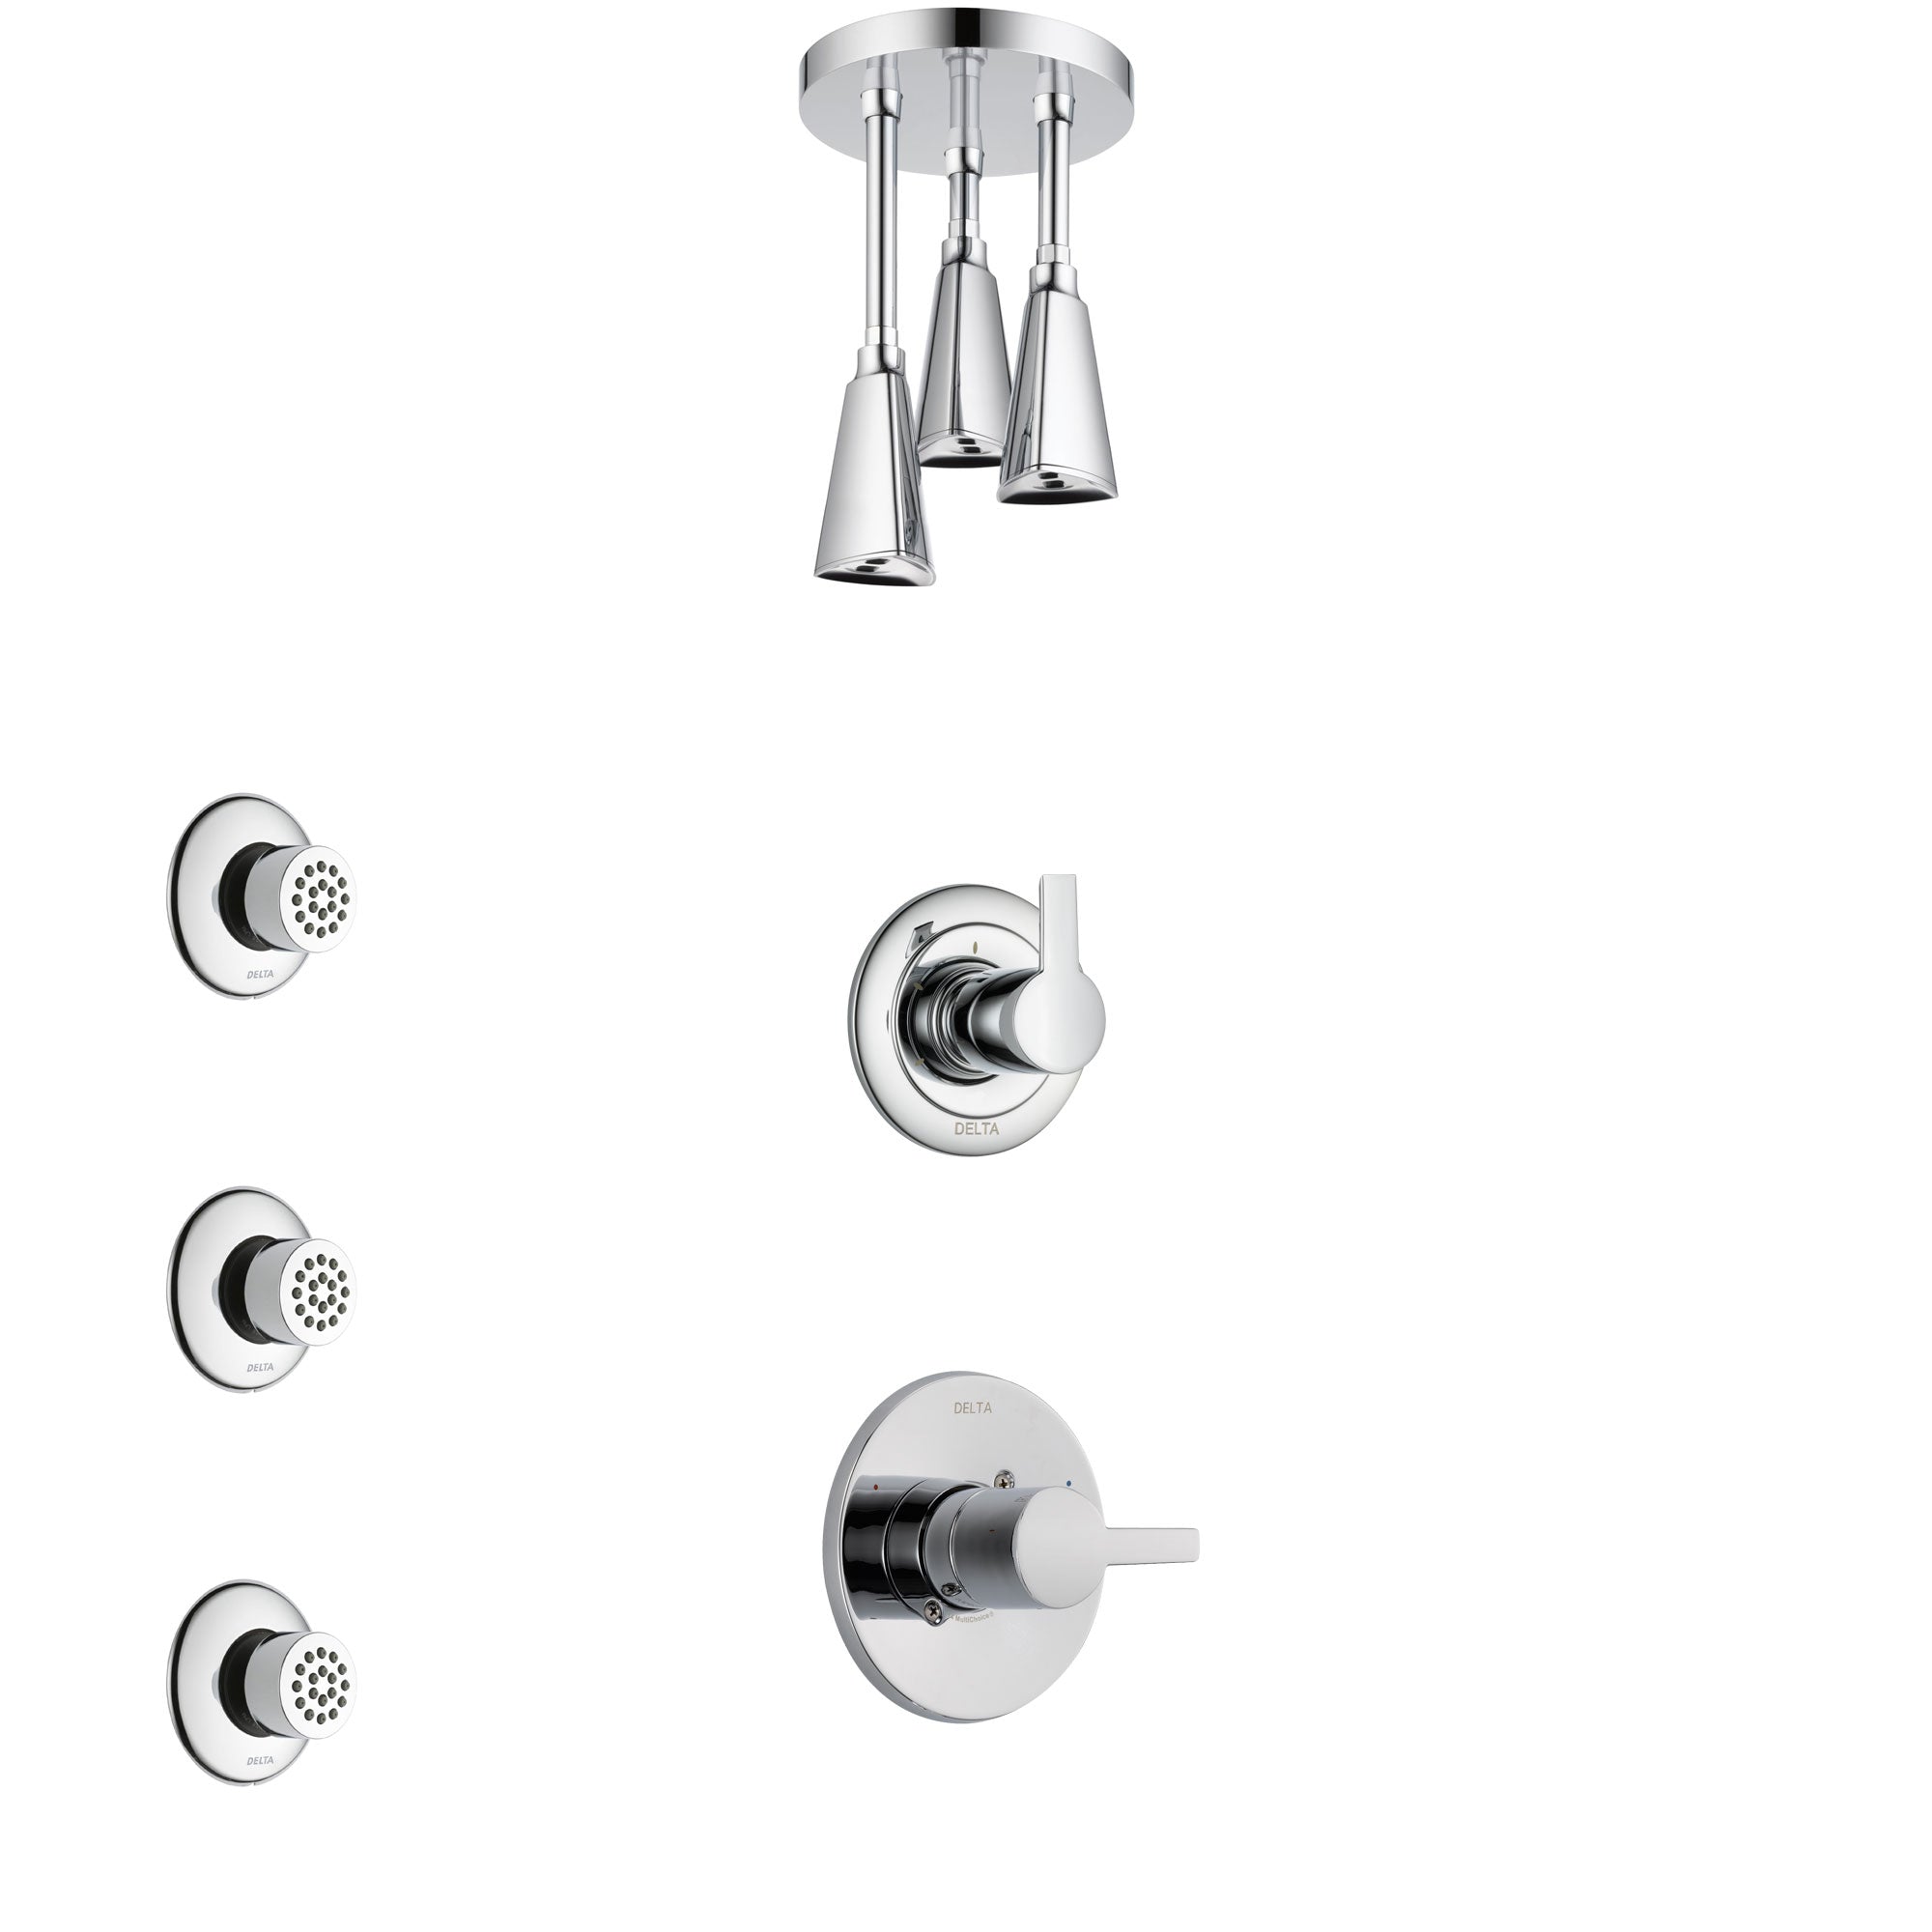 Delta Compel Chrome Finish Shower System with Control Handle, 3-Setting Diverter, Ceiling Mount Showerhead, and 3 Body Sprays SS14615